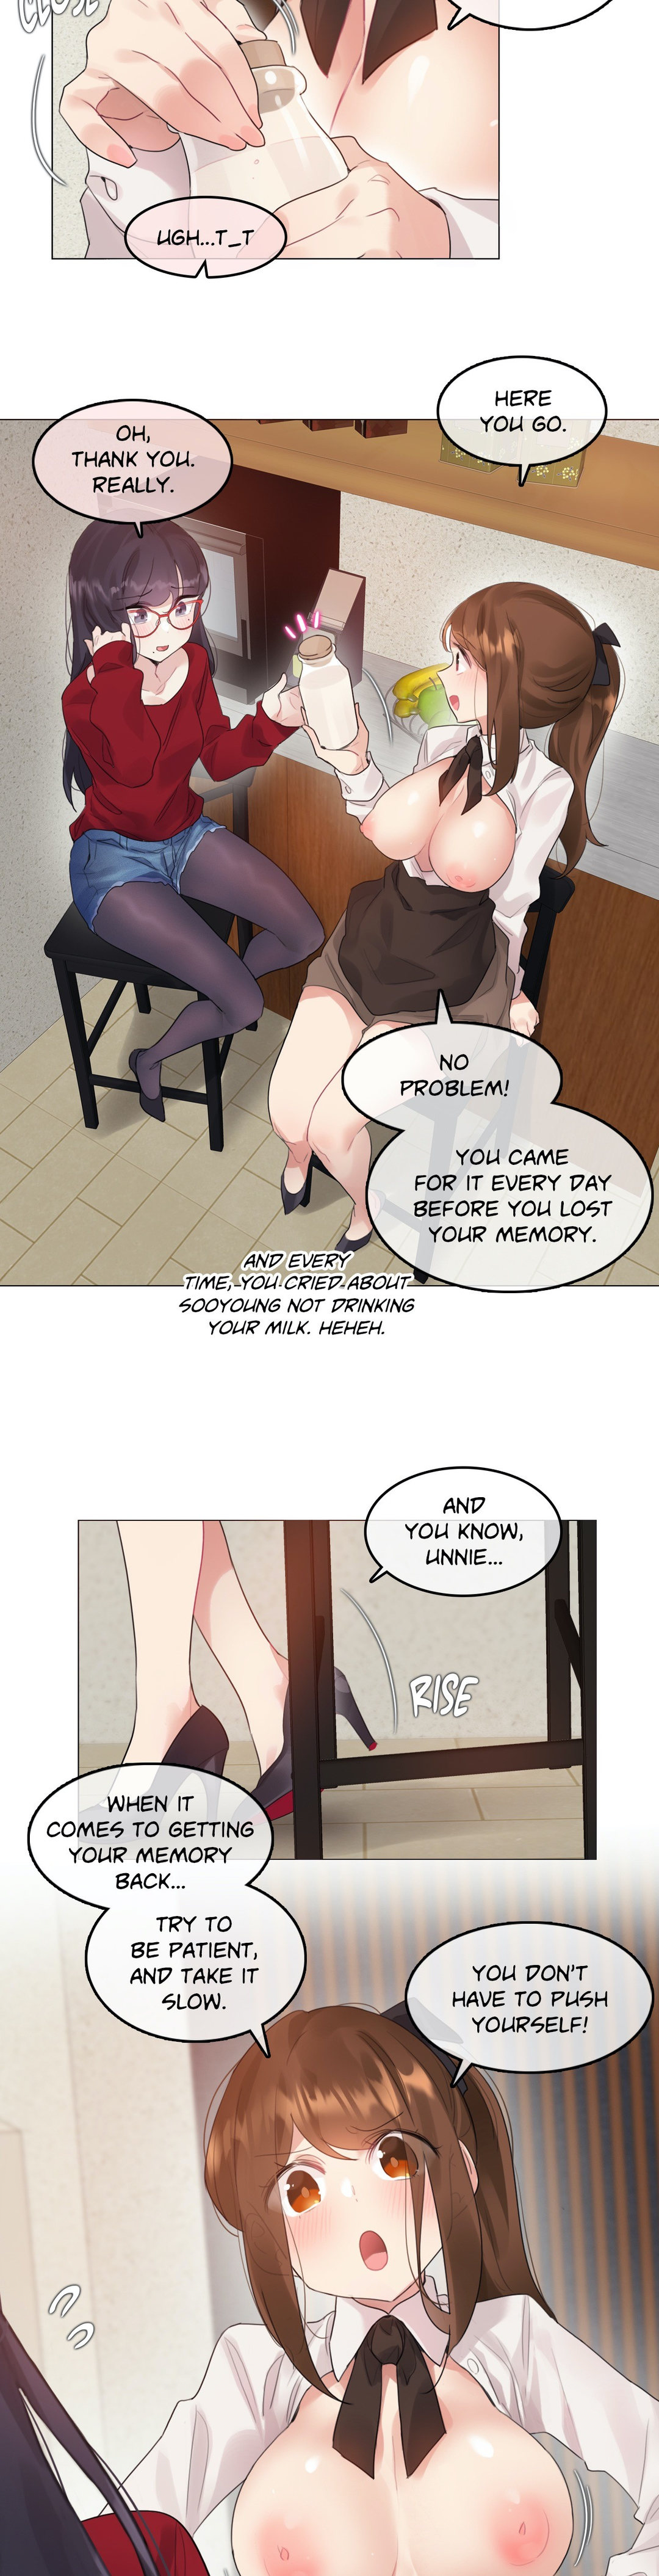 A Pervert’s Daily life - Chapter 133 Page 3